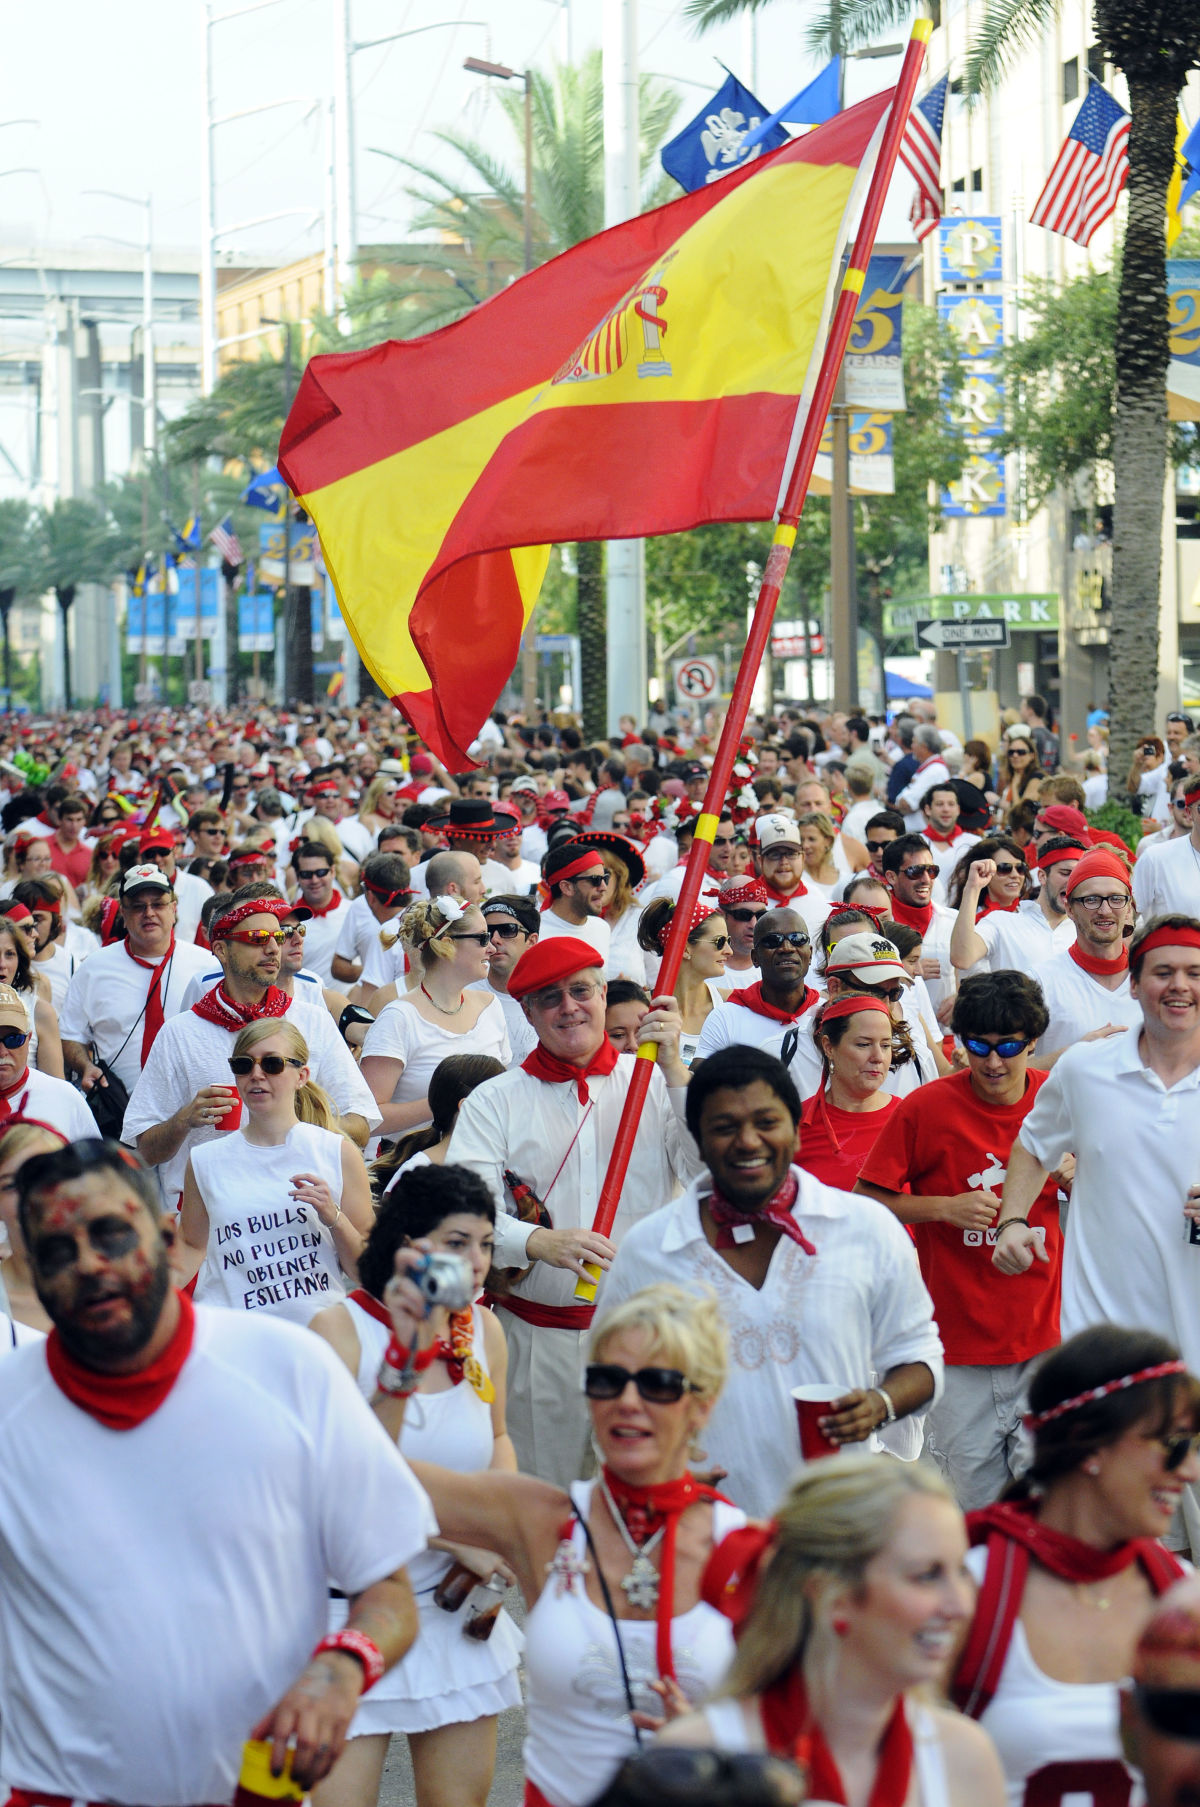 Running with the Bulls in New Orleans: Advice for first timers